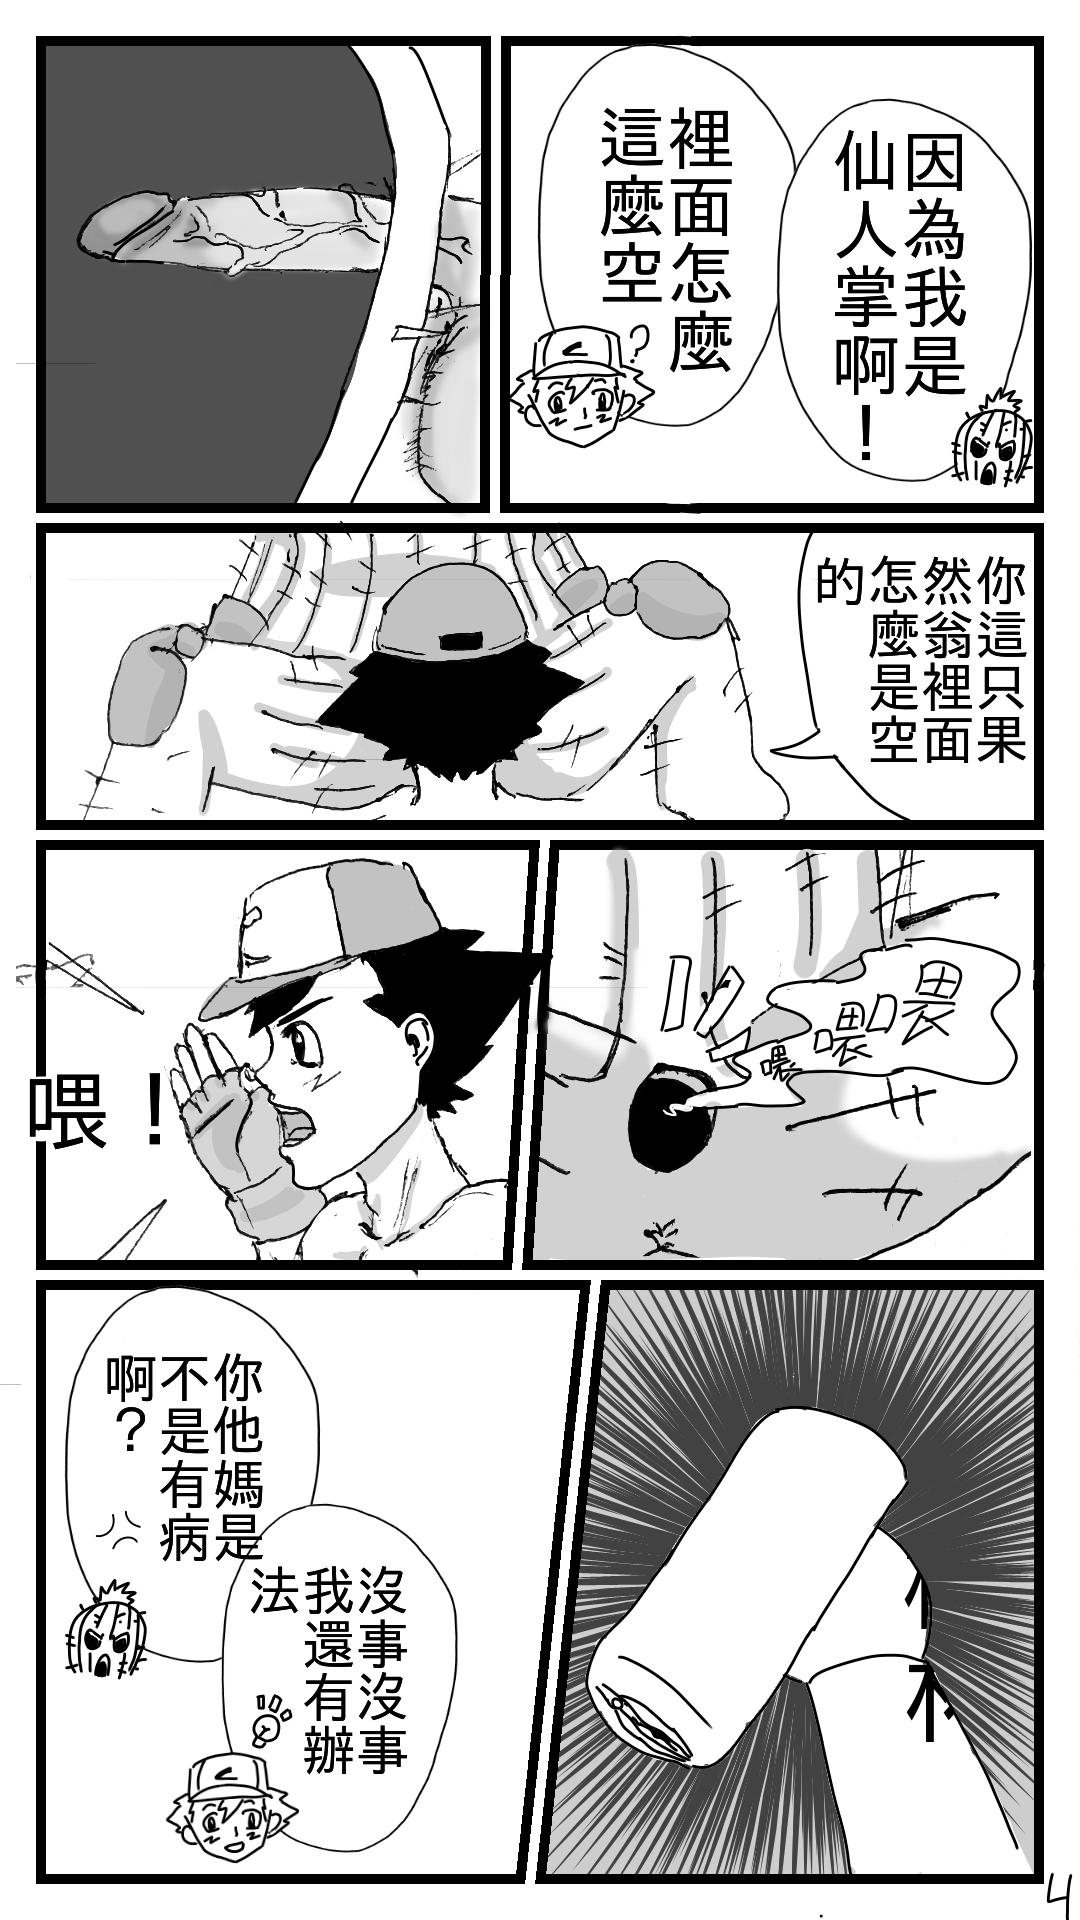 Facesitting 小智大战仙人掌兽 - Digimon Pokemon | pocket monsters Young Tits - Page 4